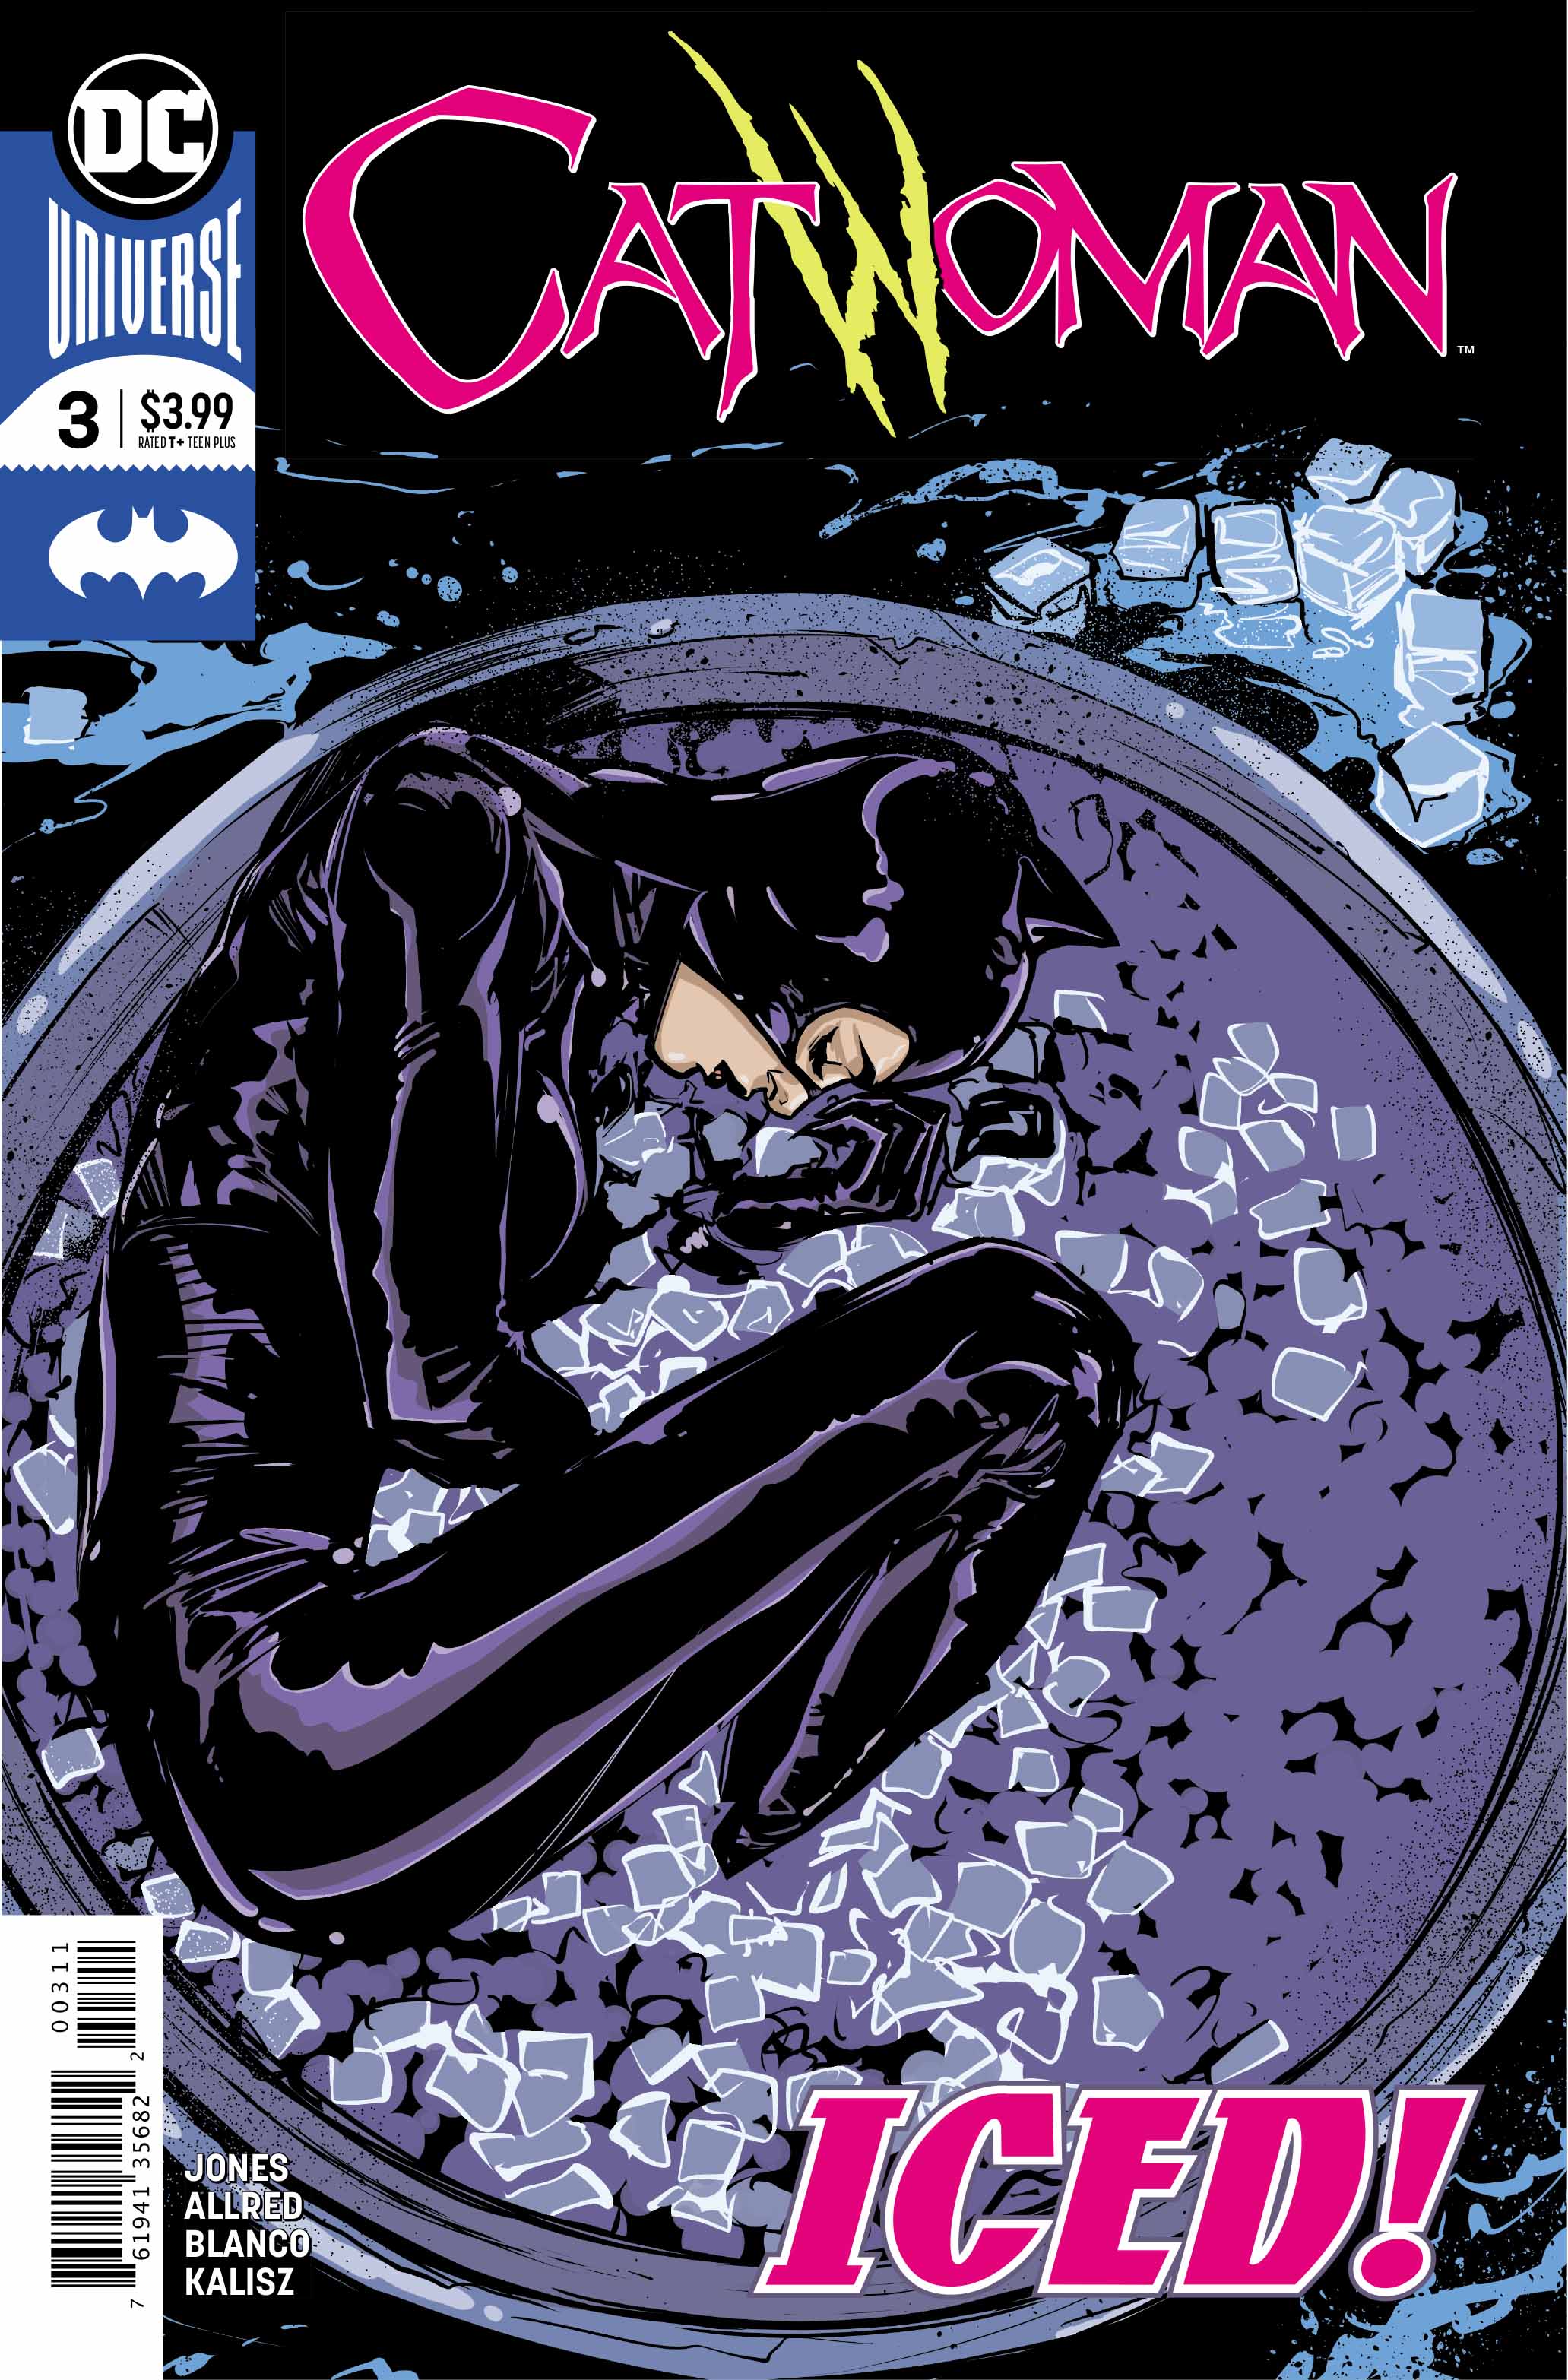 Catwoman #3 Review